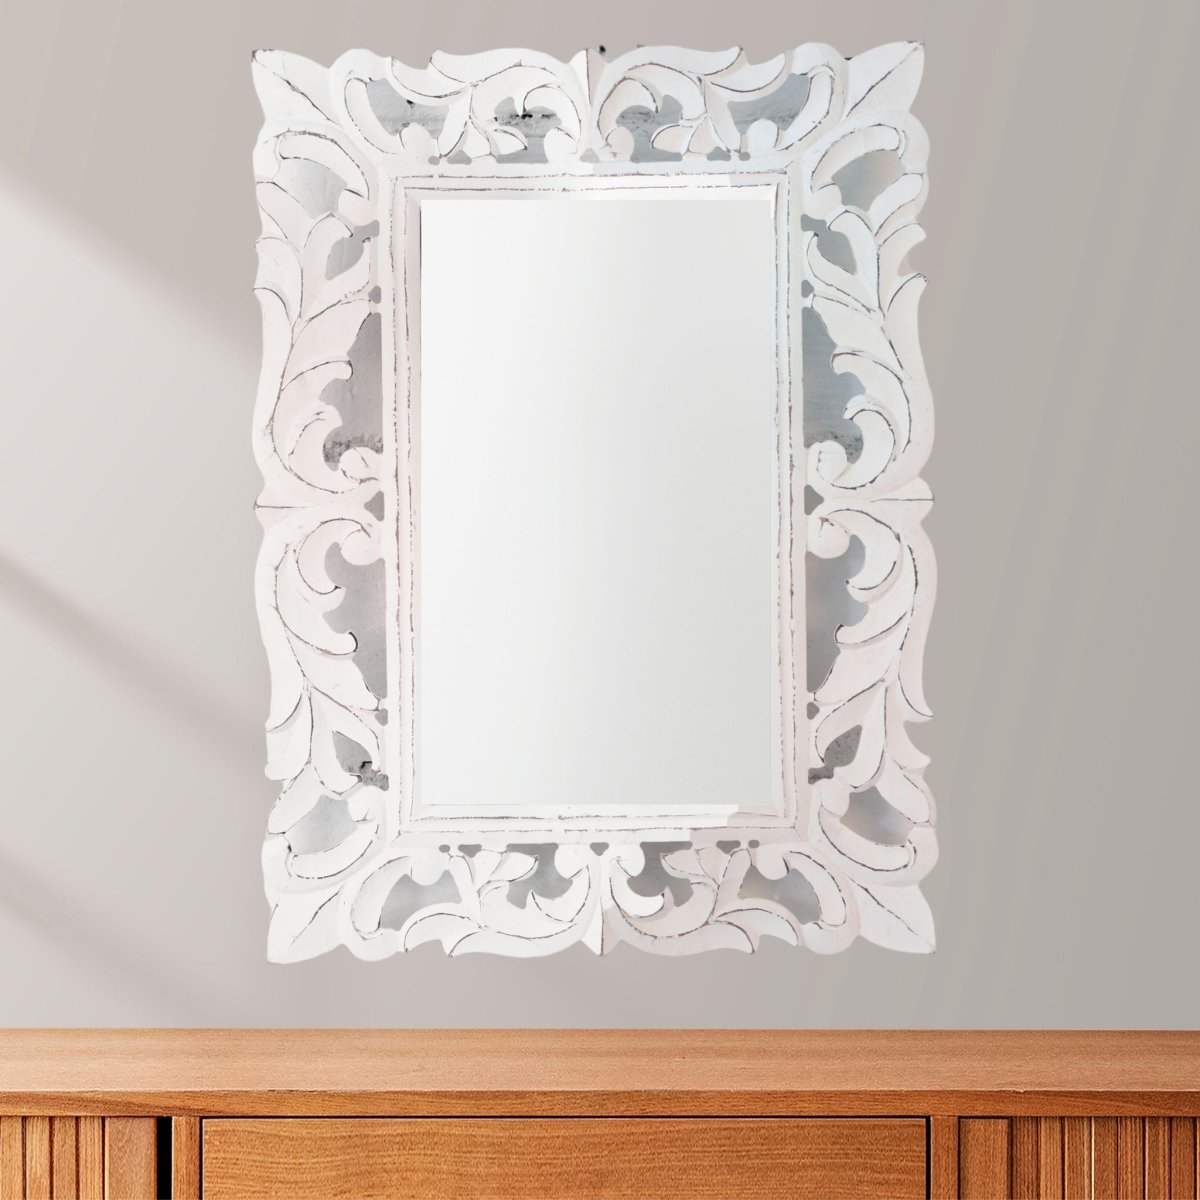 Kezevel Wooden Wall Hanging Mirror - Rectangle White Handcarved Vintage Decorative Mirrors for Living Room, Wall Showpiece